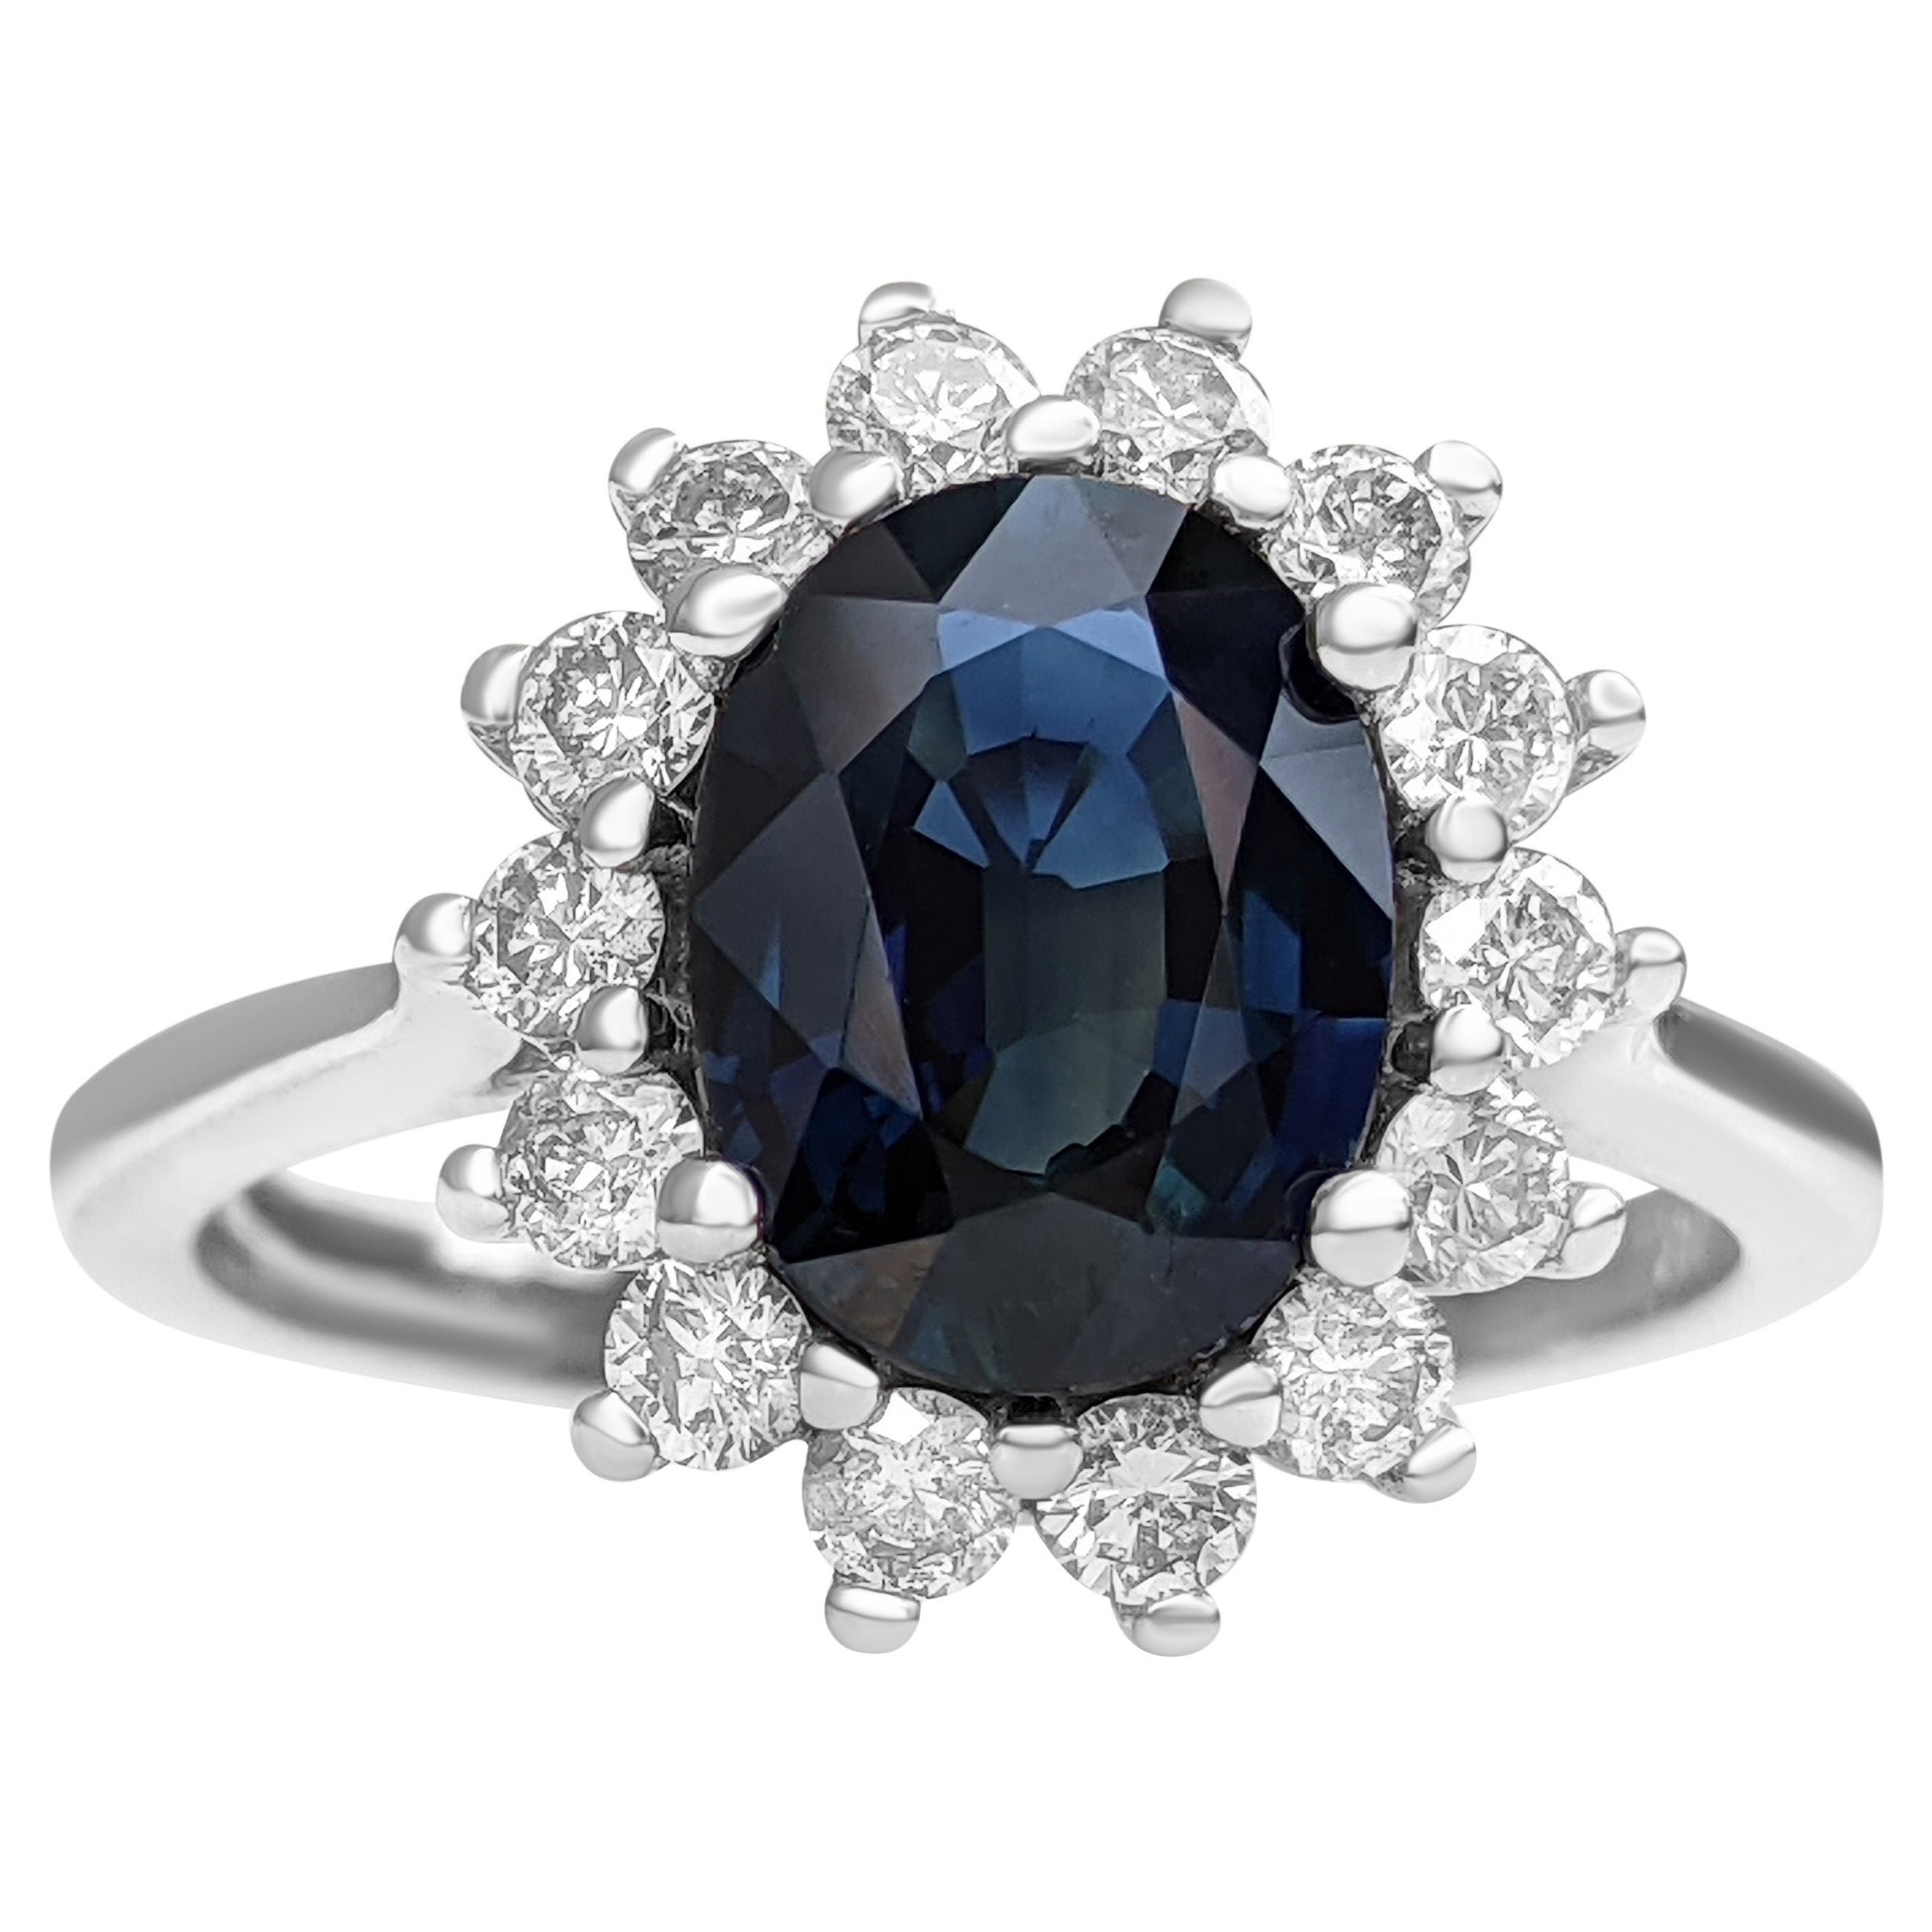 $1 No Reserve! - 1.99 Carat Sapphire and 0.50ct Diamonds, 14kt White Gold Ring